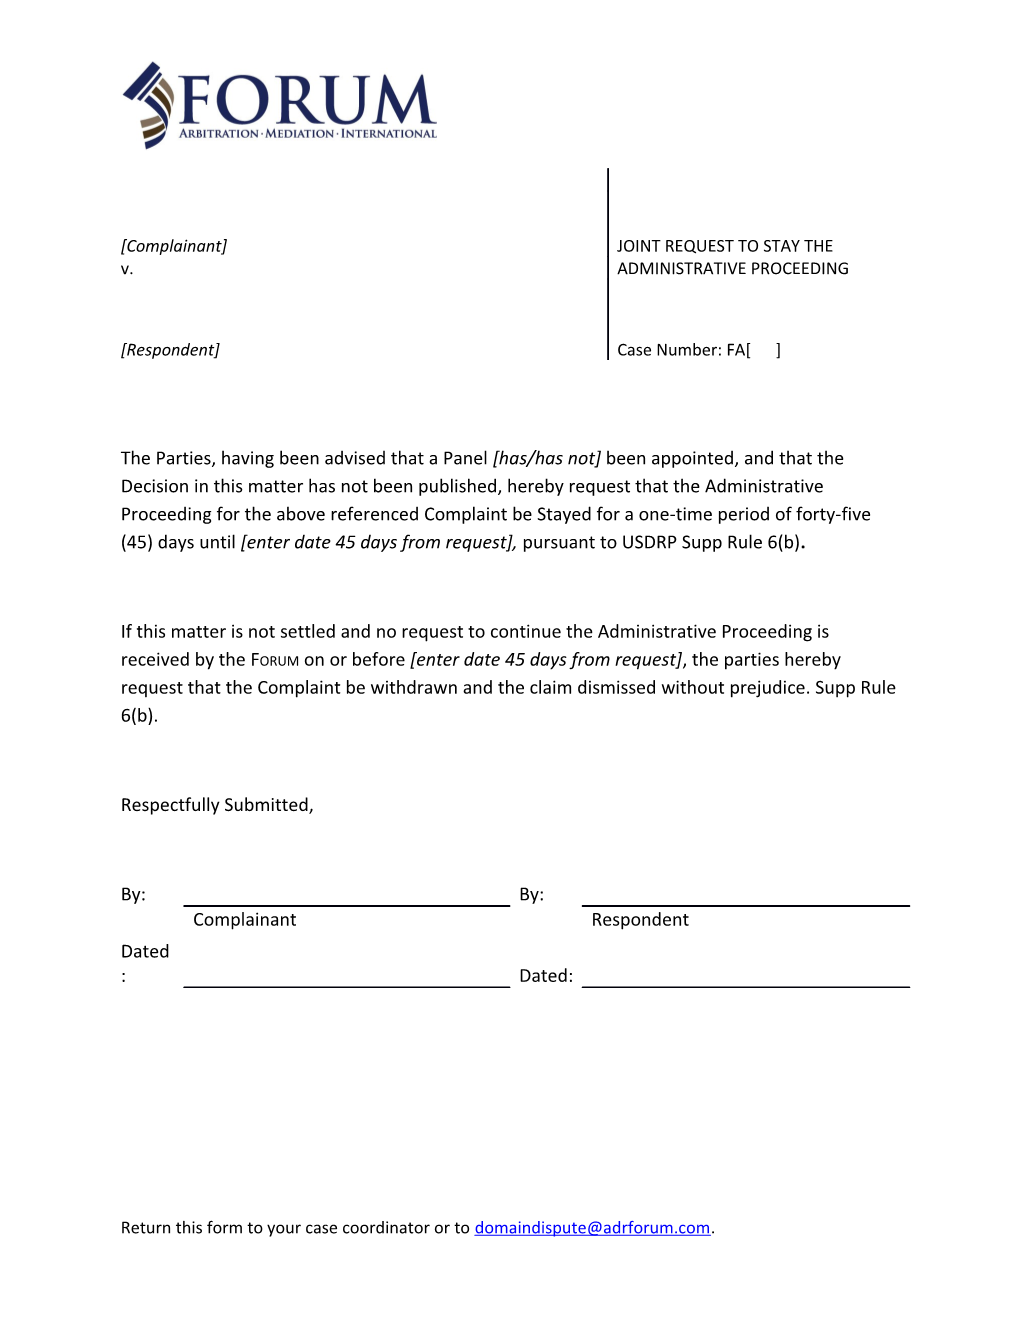 Return This Form to Your Case Coordinator Or to